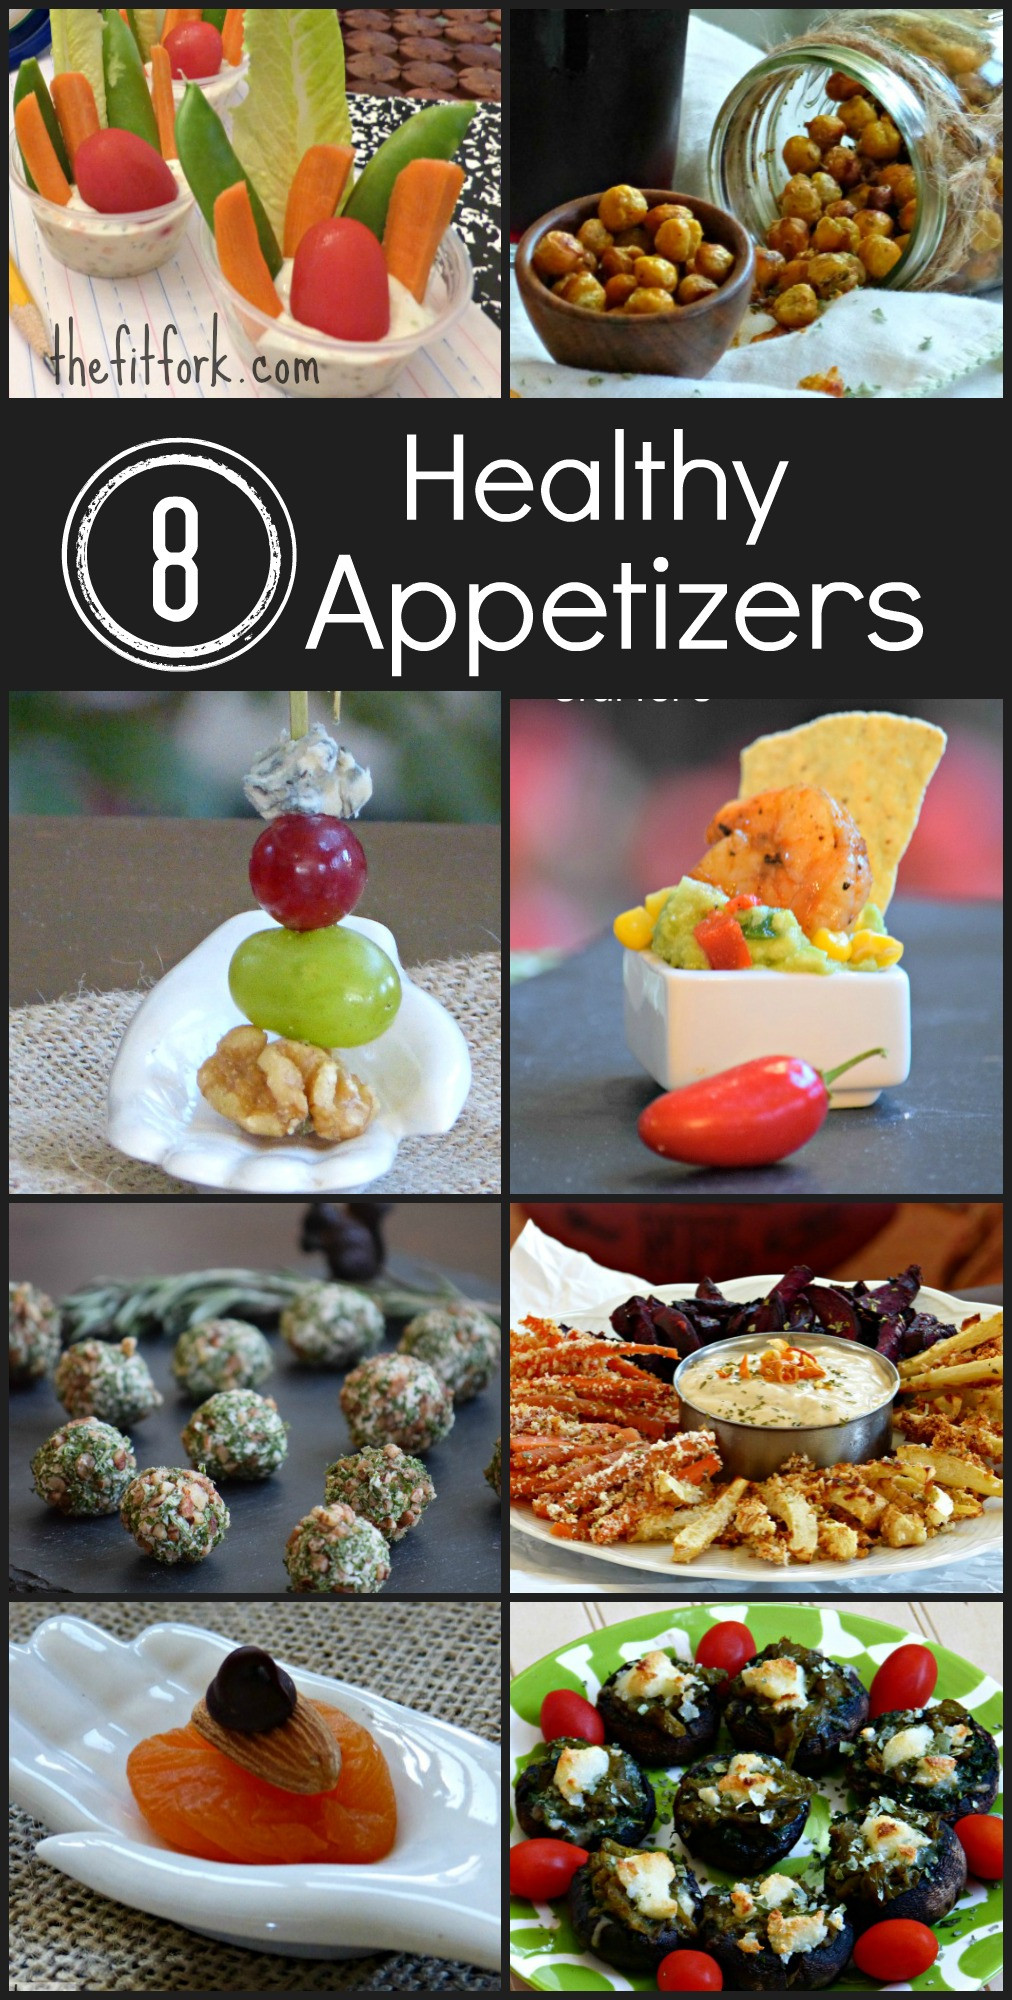 Healthy New Year'S Eve Appetizers
 Lettuce Party 8 Healthy Appetizers for New Year’s Eve